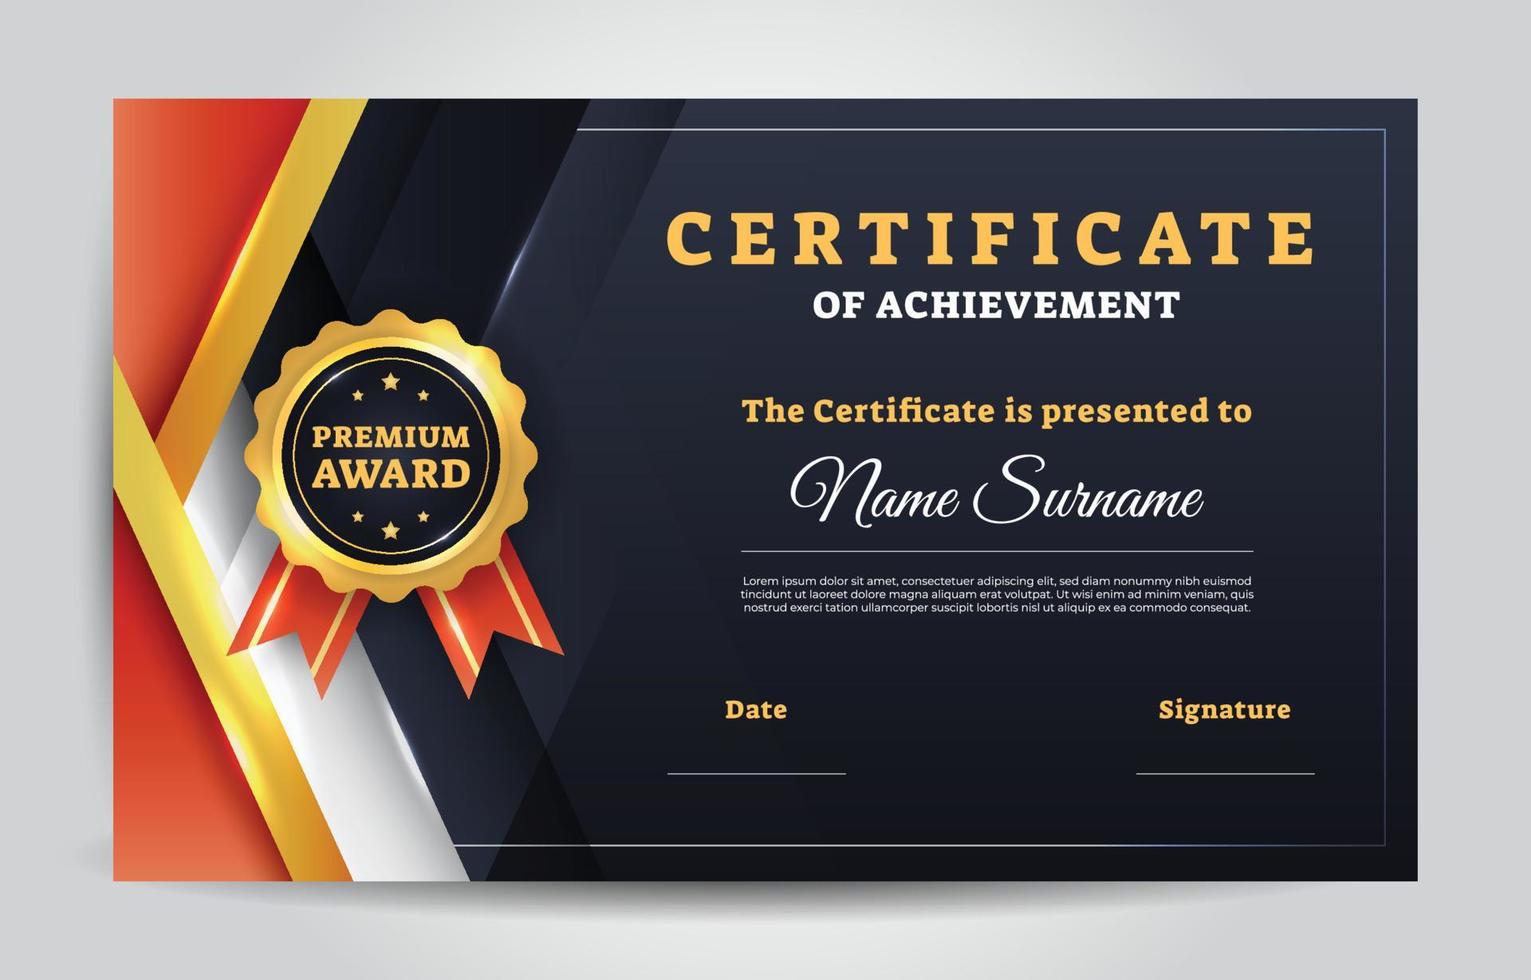 Certificate of Achievement Background Template vector